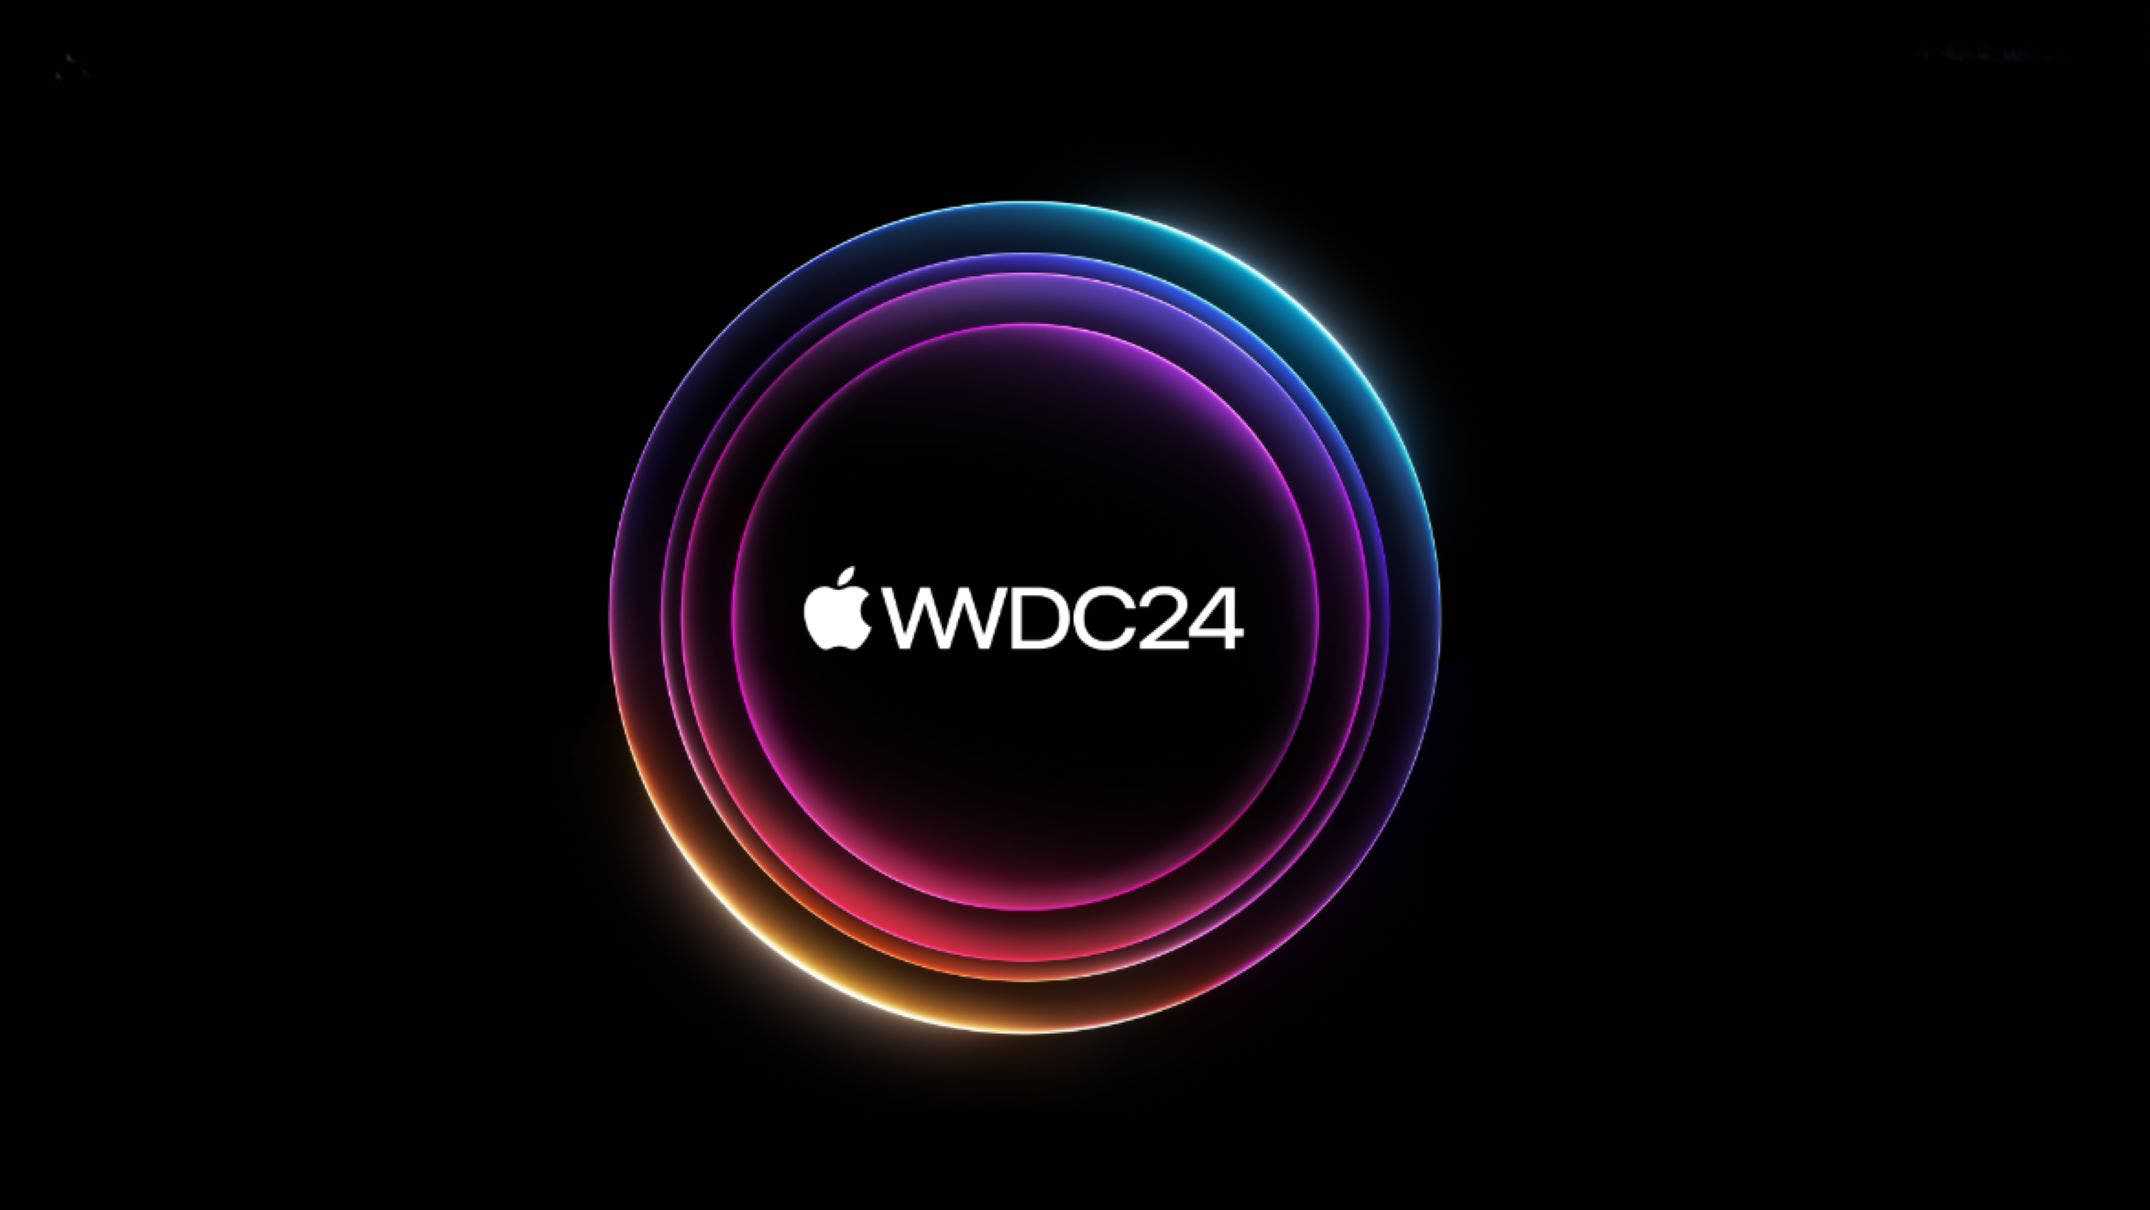 Apple WWDC 2024: the Next Generation of Innovation